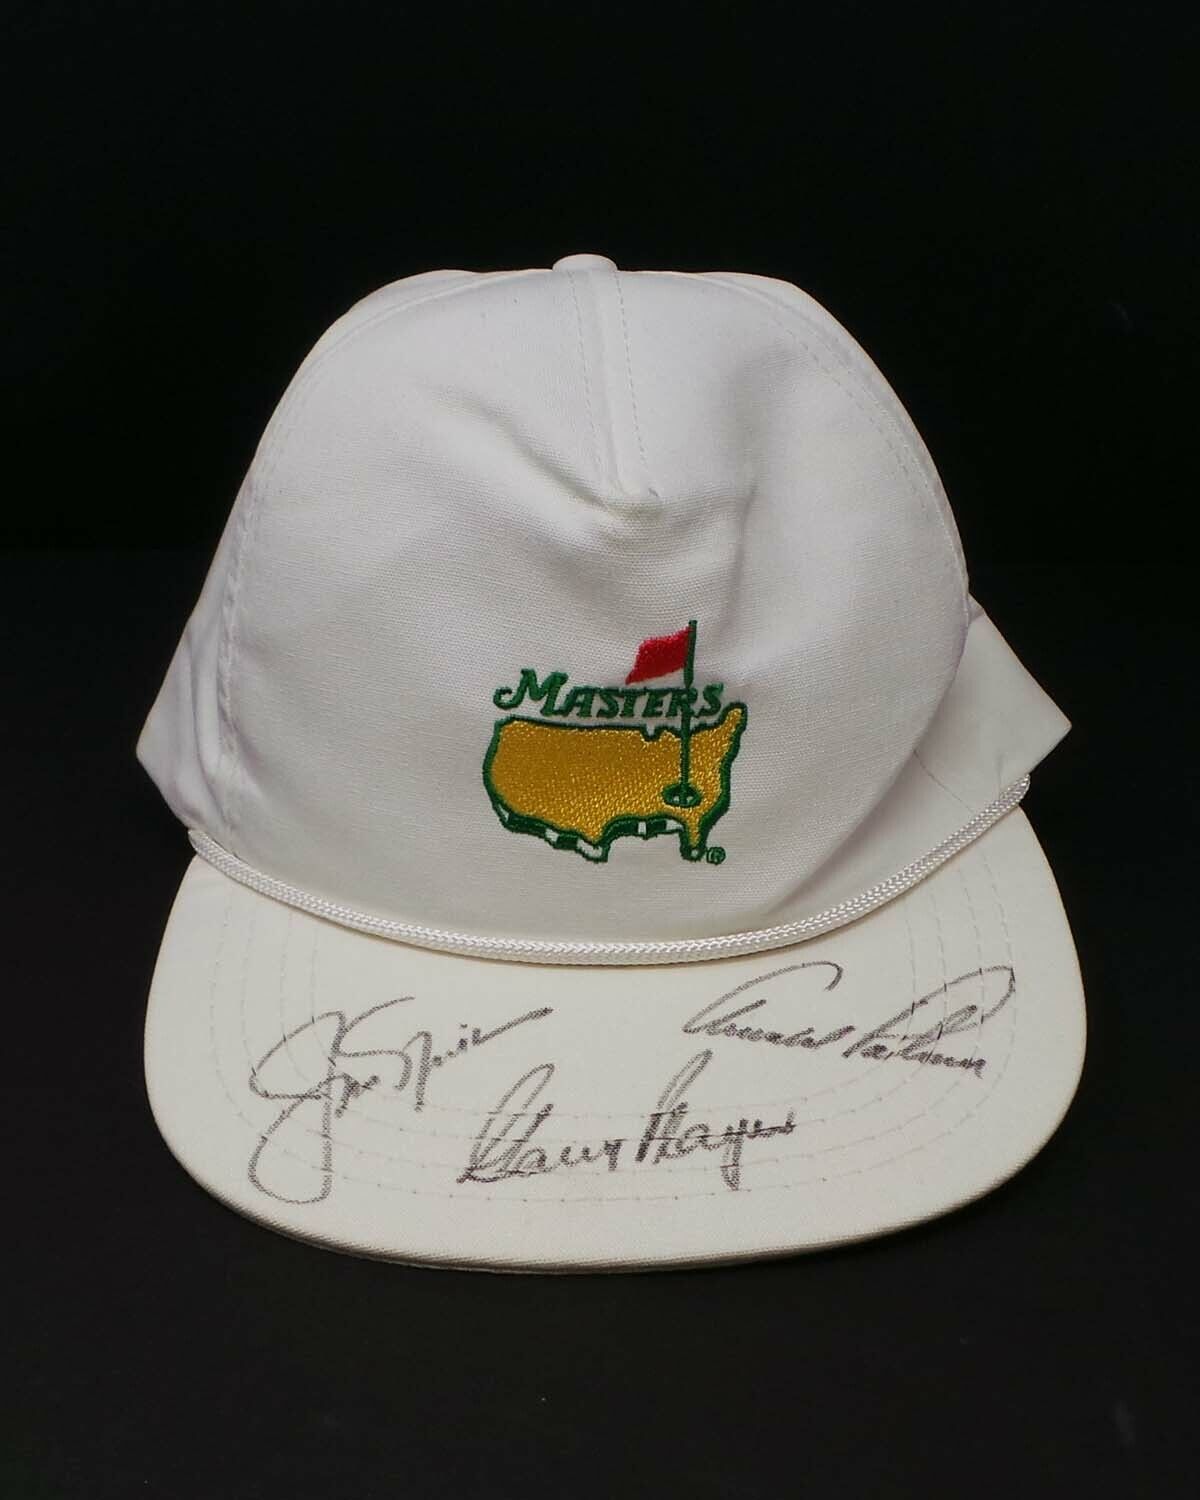 Gary PLAYER Arnold PALMER & Jack NICKLAUS Signed Masters Golf Cap AFTAL RD COA 